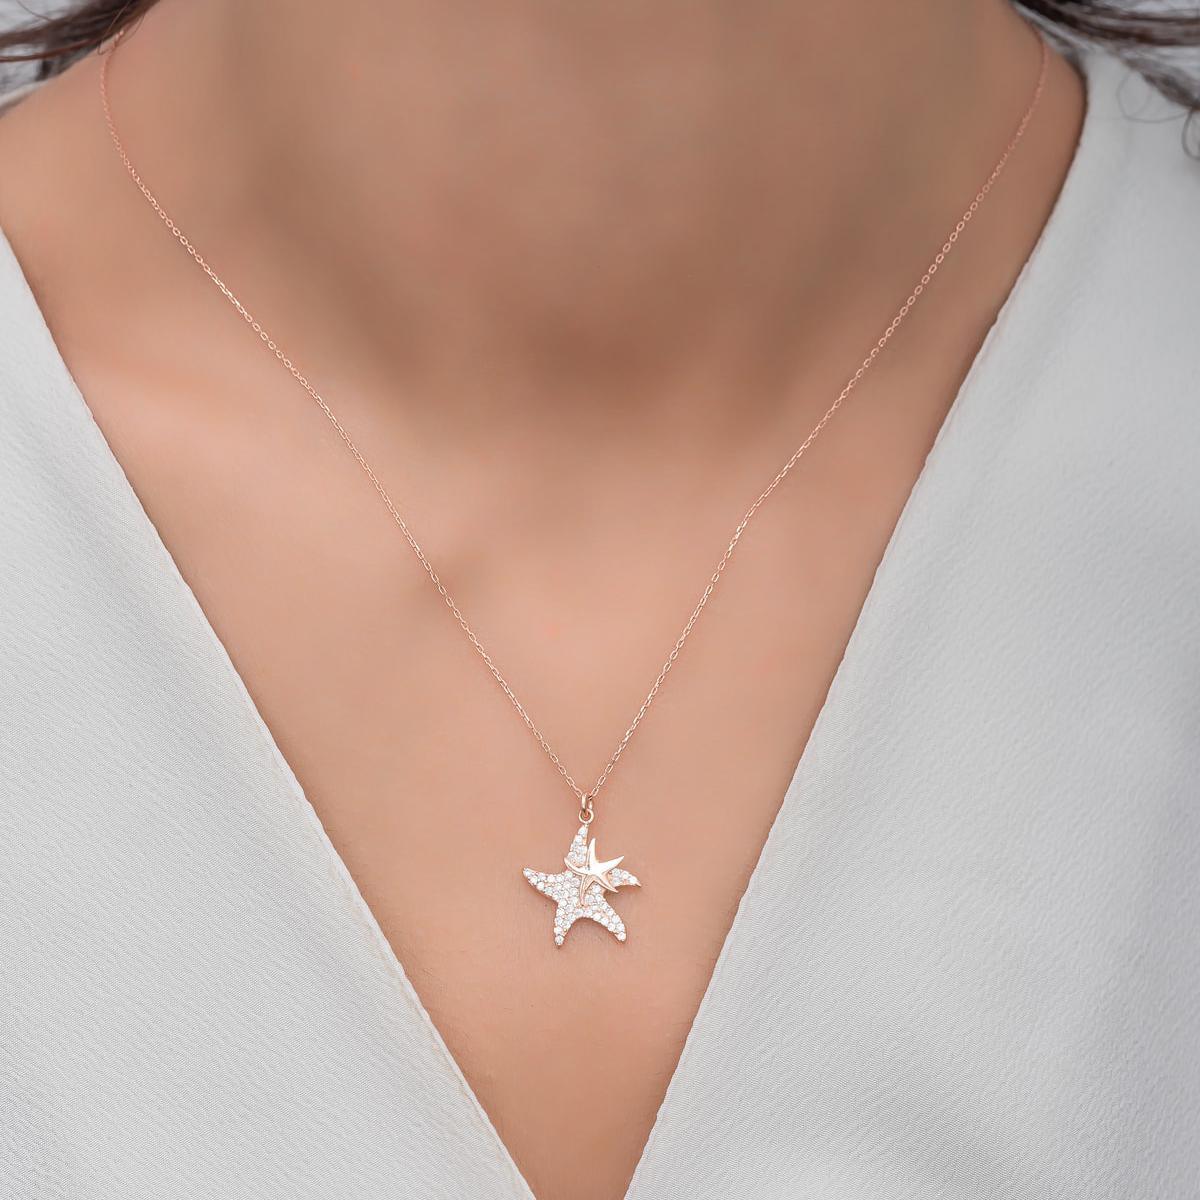 Starfish Diamond Pendant • Star Necklace Gold • Star Sign Necklace - Trending Silver Gifts